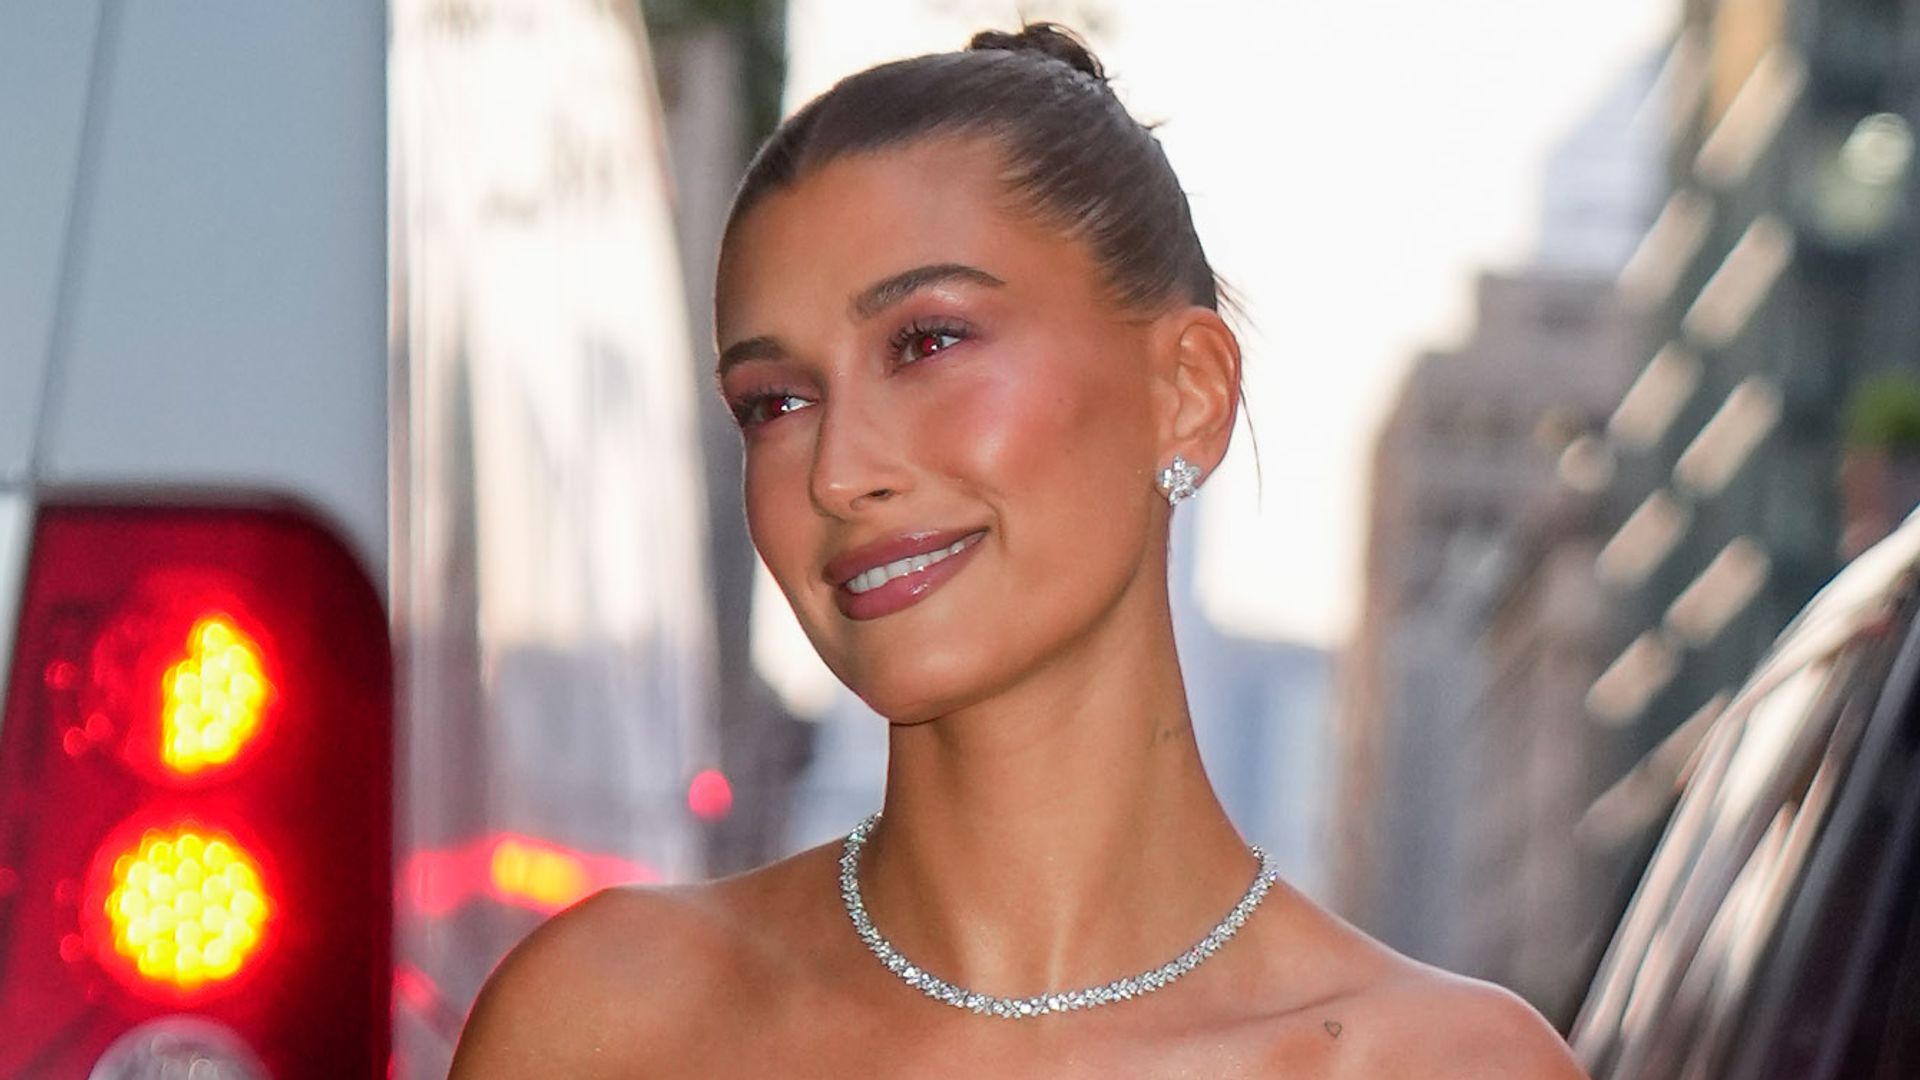 Hailey Bieber smiling in a pink dress in New York